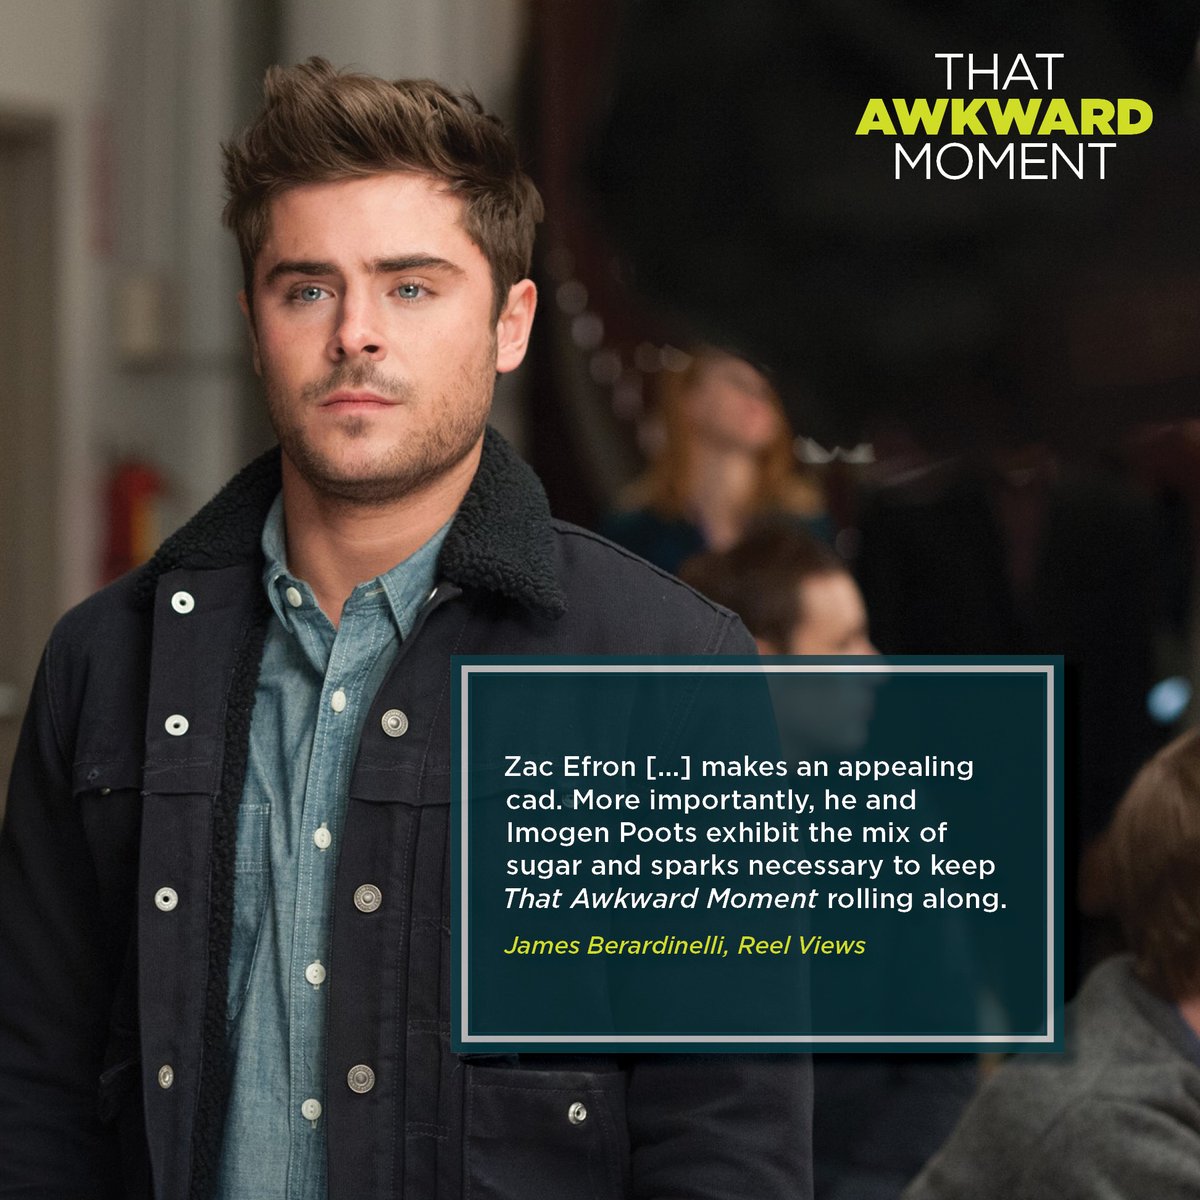 Zac Efron [...] makes an appealing cad. More importantly, he and Imogen Poots exhibit the mix of sugar and sparks necessary to keep That Awkward Moment rolling along.

#ThatAwkwardMoment #TAM #ZacEfron